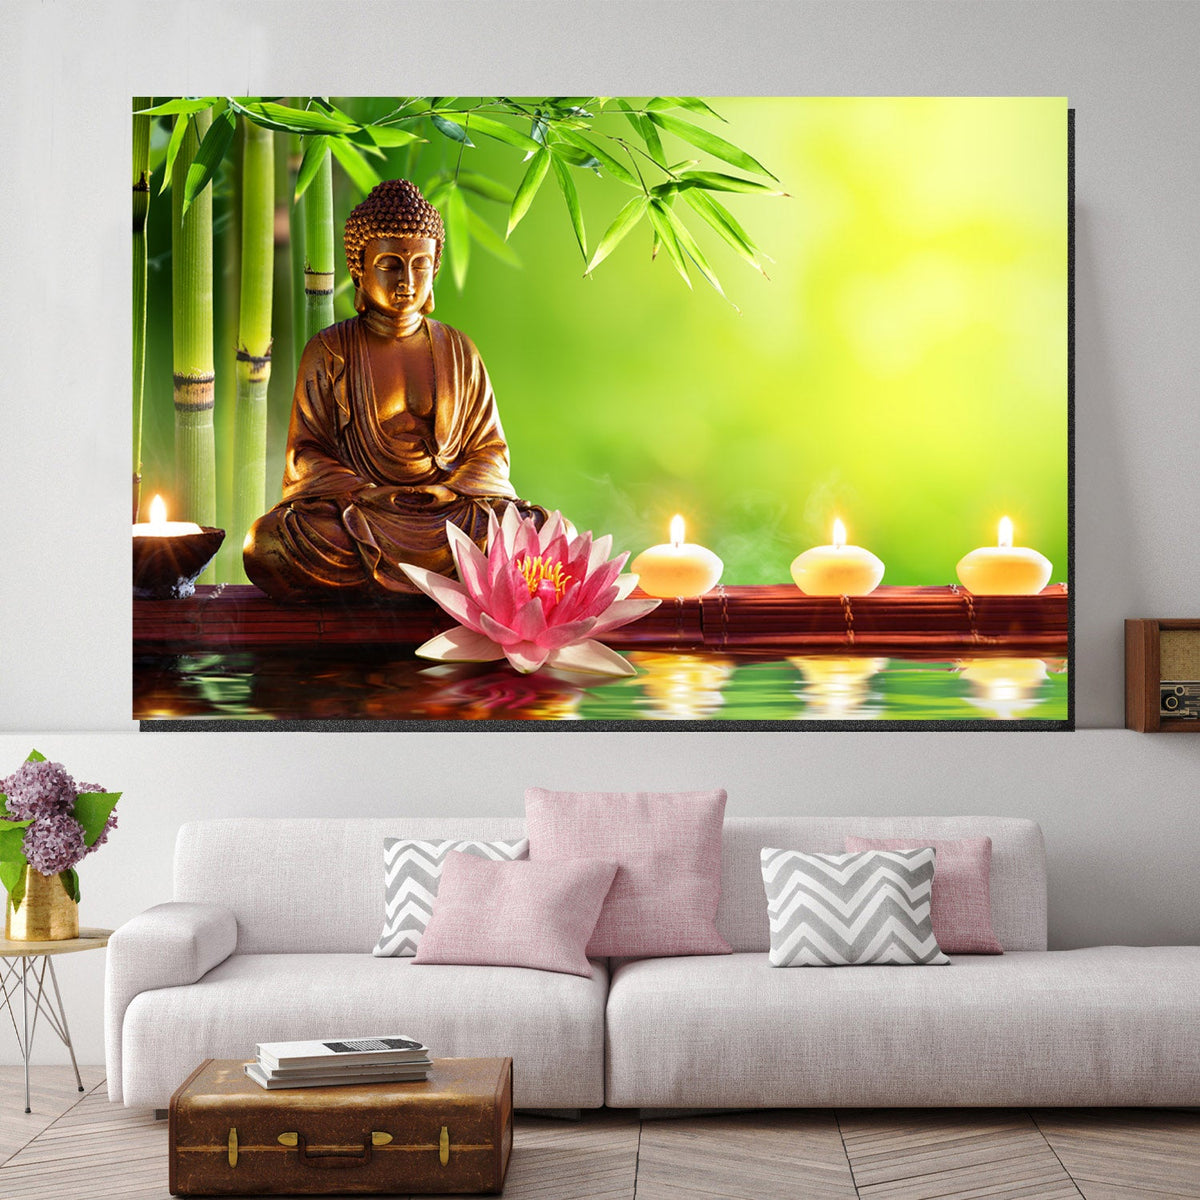 https://cdn.shopify.com/s/files/1/0387/9986/8044/products/BuddhawithcandlesCanvasArtprintStretched-3.jpg